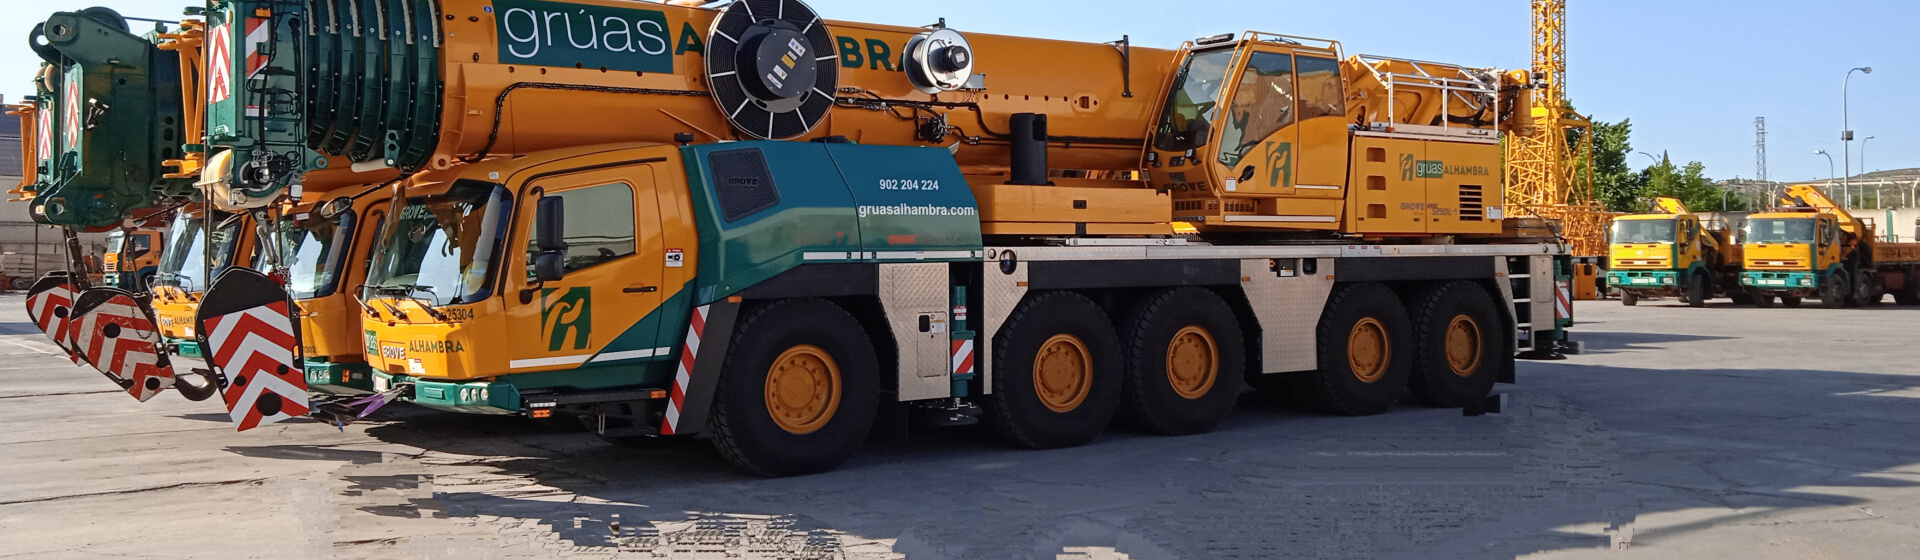 Reliable-performance-and-service-leads-Gruas-Alhambra-to-invest-in-more-Grove-all-terrain-cranes-1.jpg